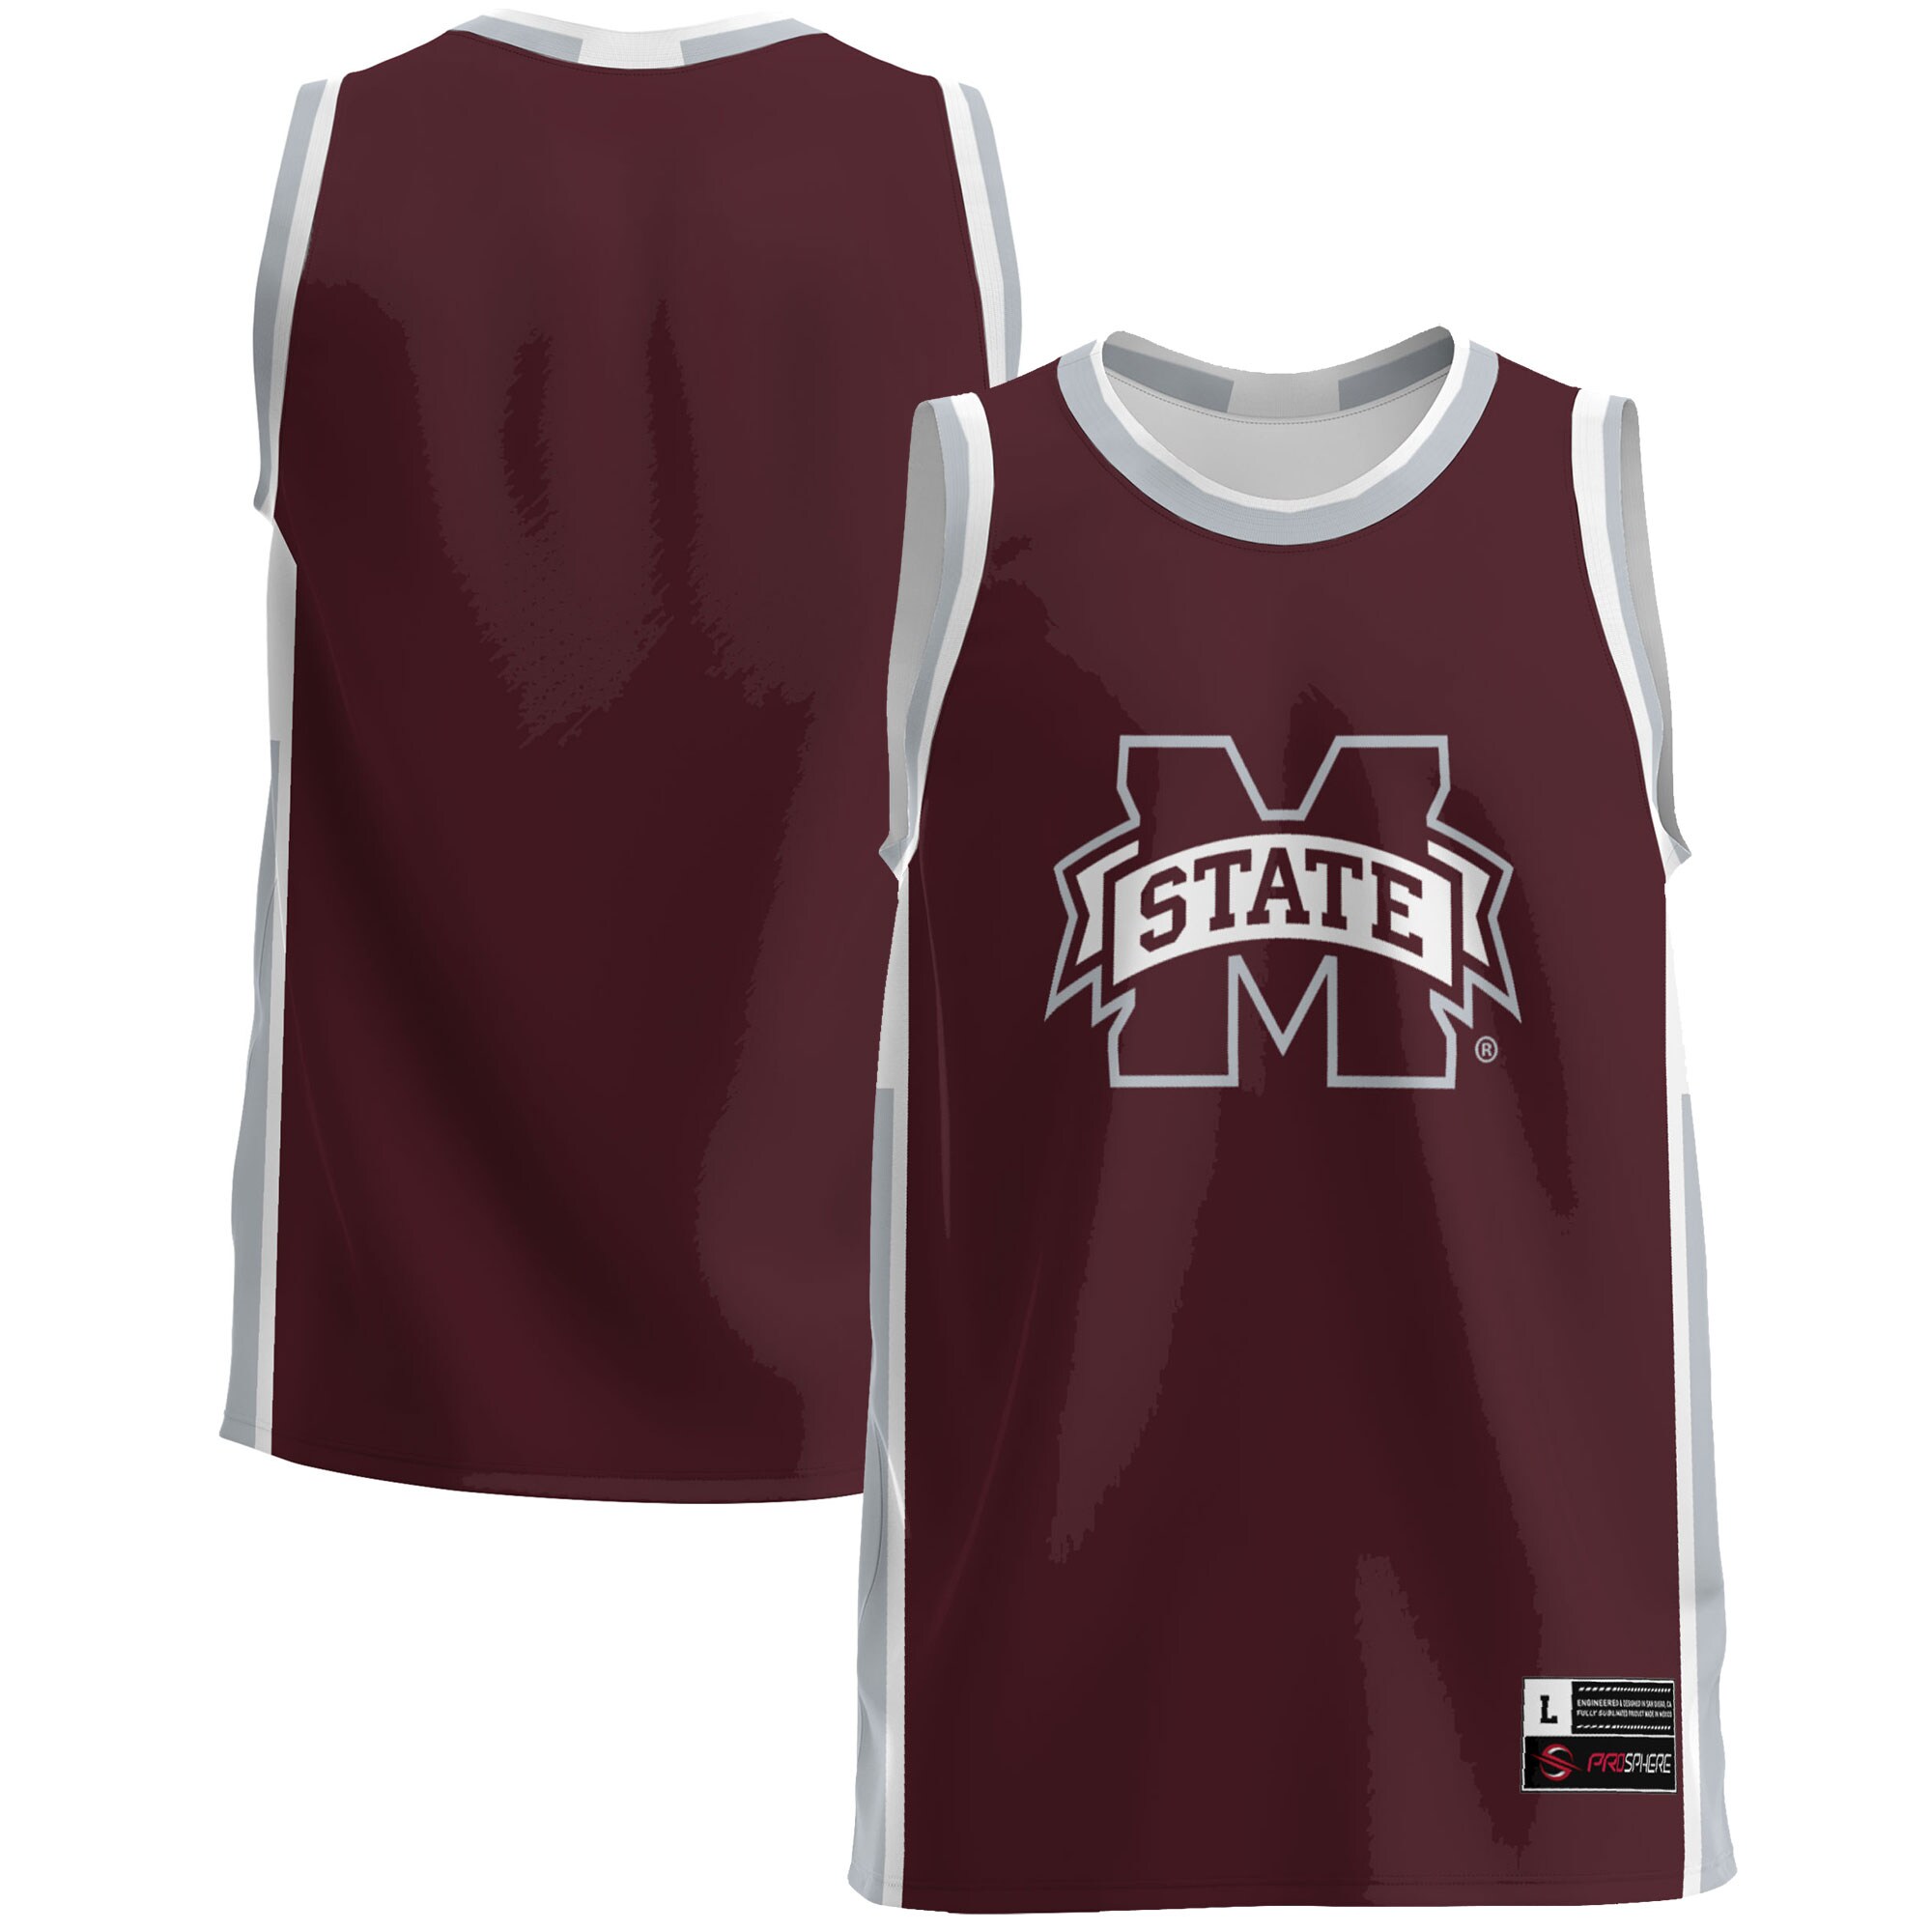 Mississippi State Bulldogs Basketball Jersey - Maroon For Youth Women Men